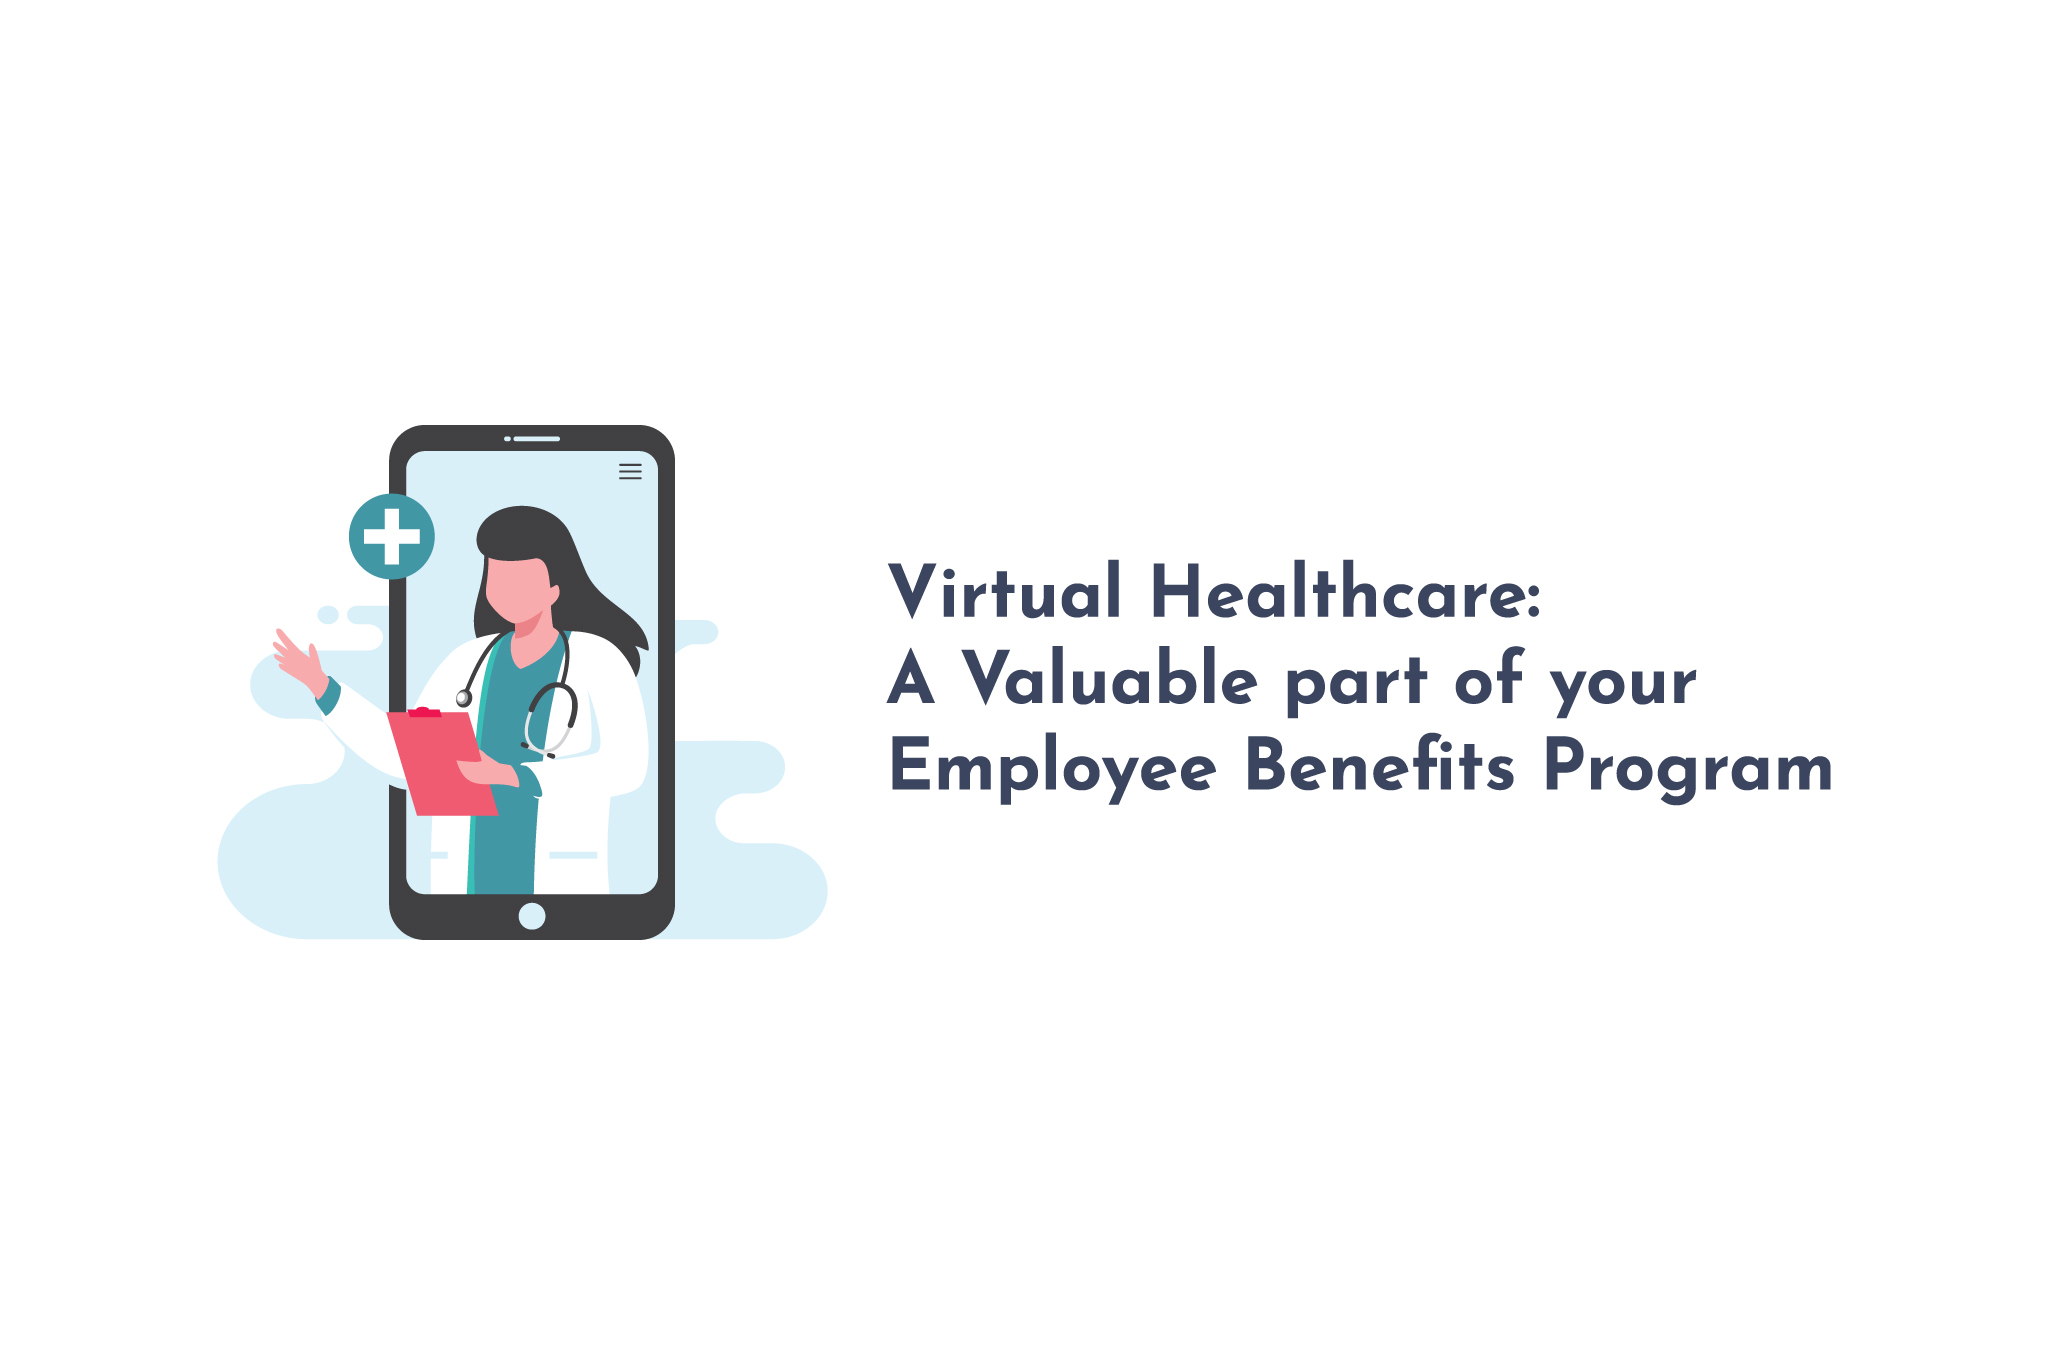 Virtual Healthcare: A Valuable part of your Employee Benefits Program